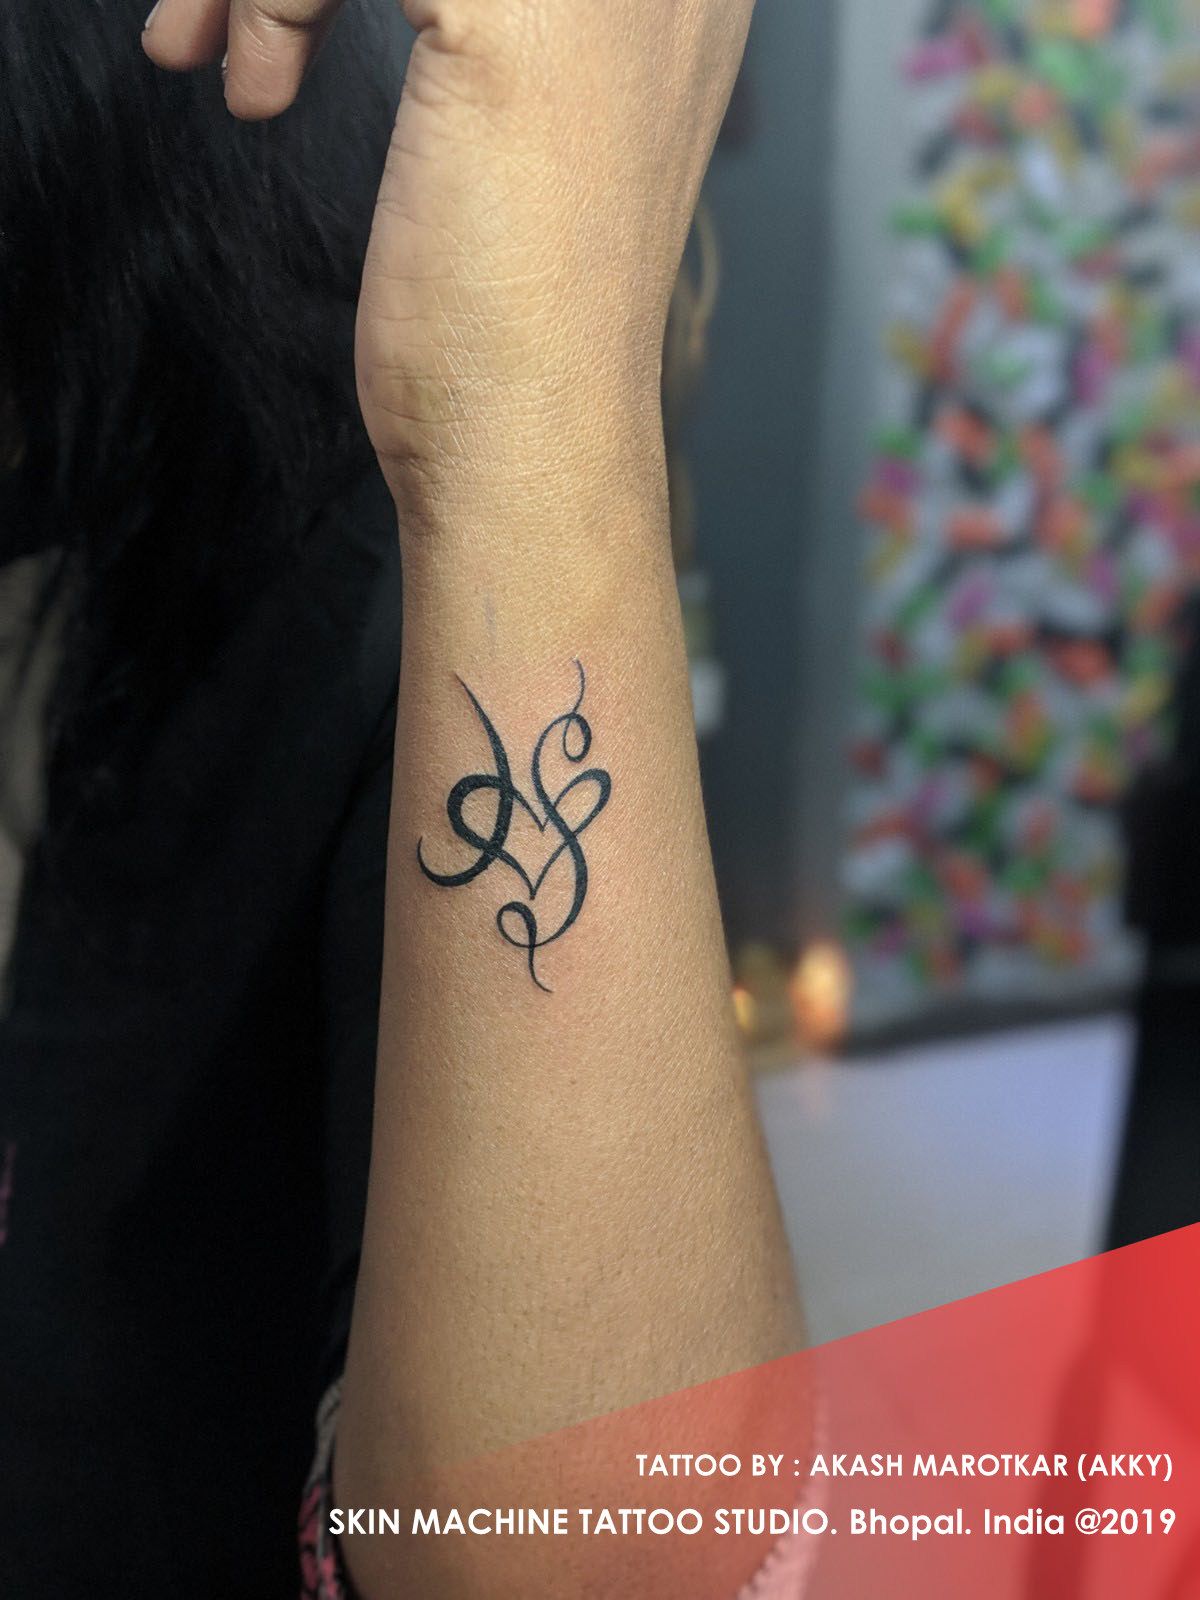 HS Tattoo Meaning: Unraveling the Stories Behind Symbolic Body Art